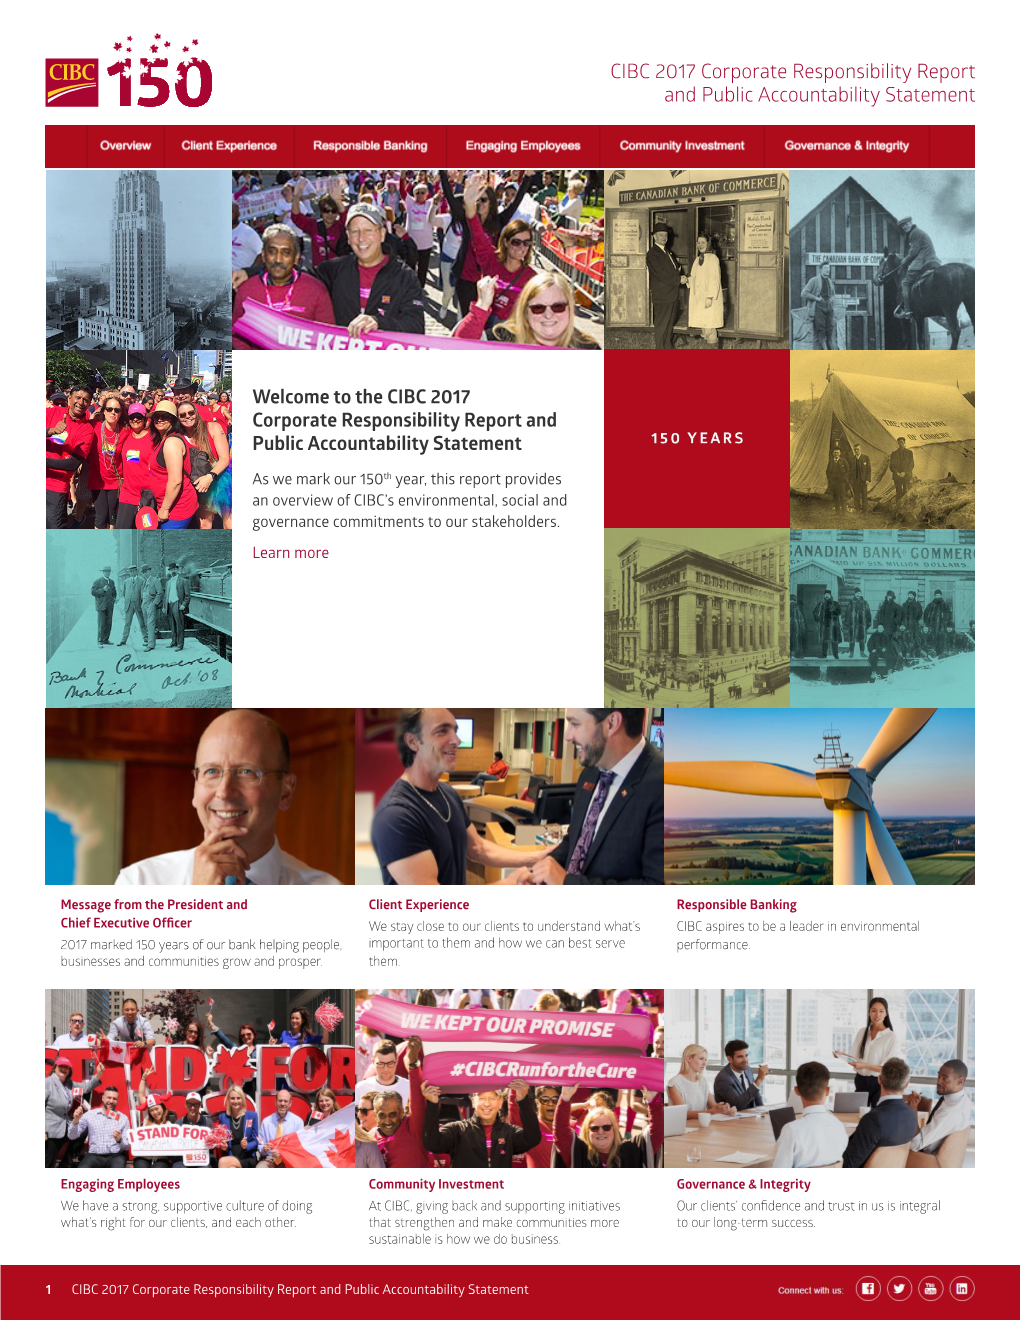 CIBC 2017 Corporate Responsibility Report and Public Accountability Statement